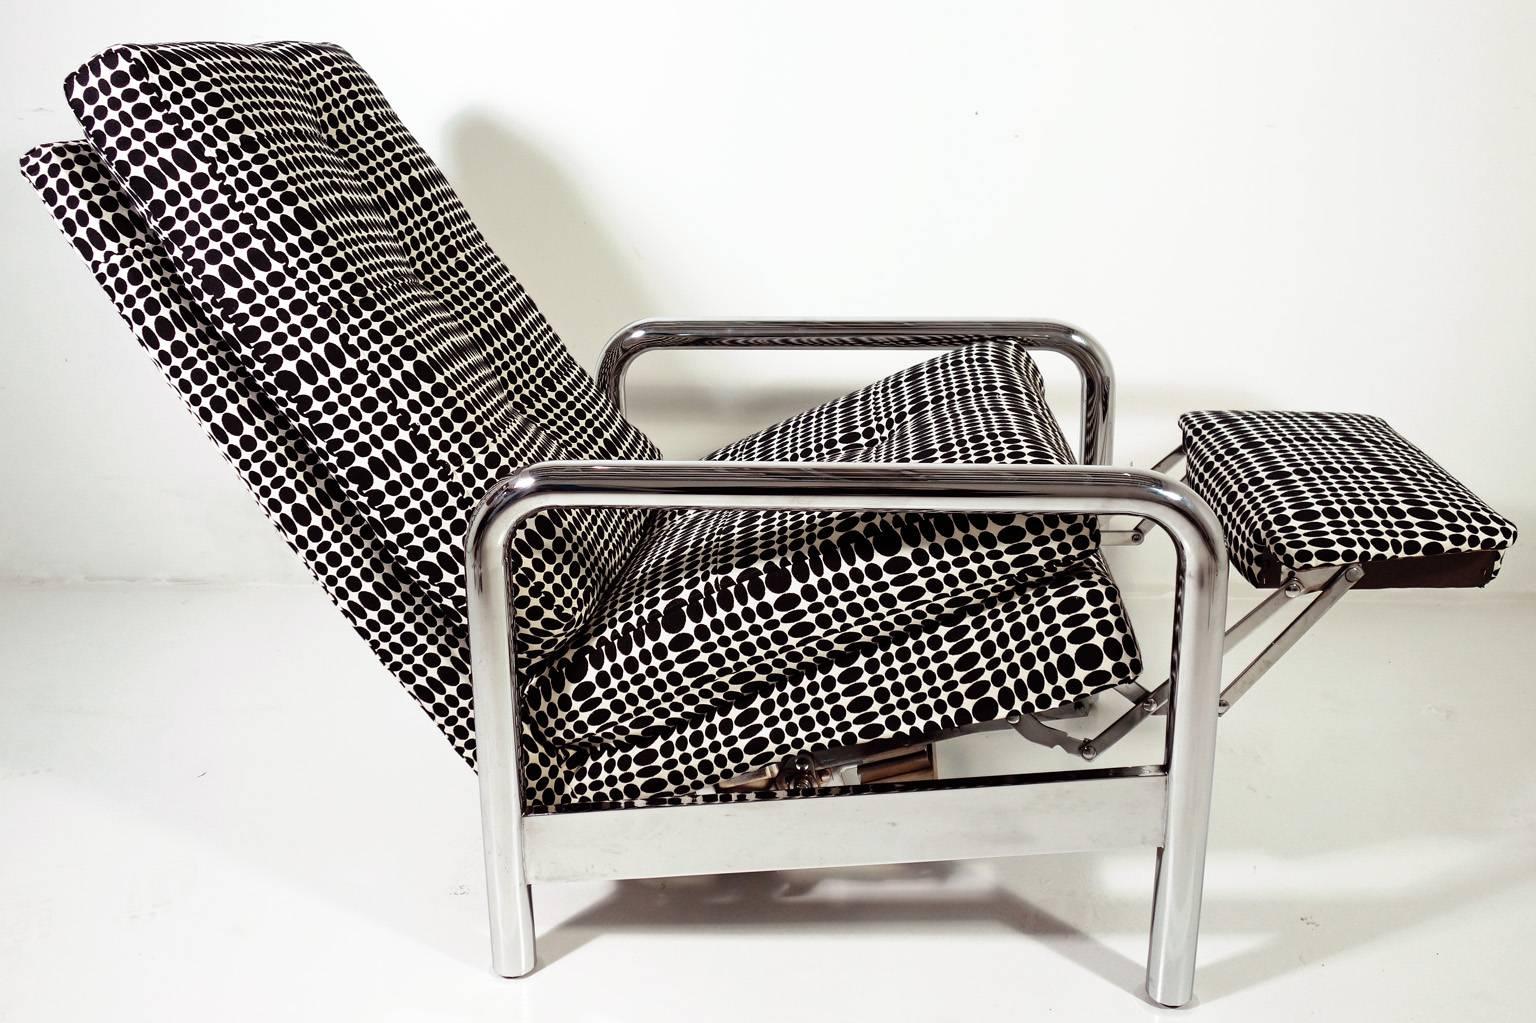 Amazing Milo Baughman reclining lounge chair. Chrome tubular frame covered with Verner Panton fabric. This stunning chair has a heavy chrome finish. The upholstery is clean and comfortable. Truly an exceptional piece.